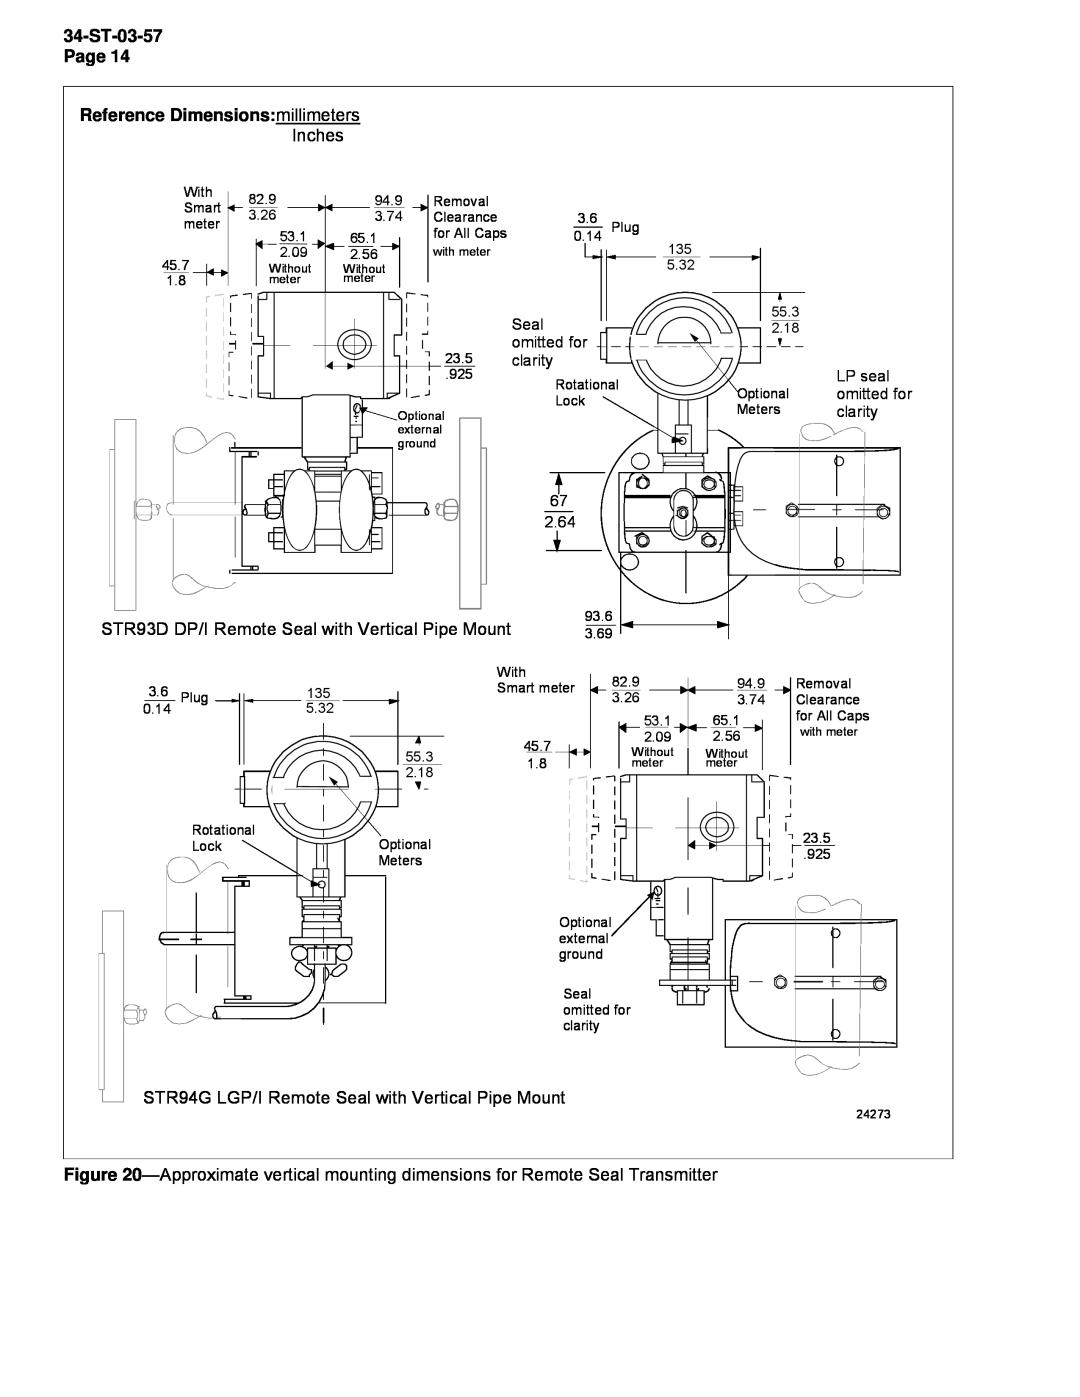 Honeywell STR93D, STR94G manual 34-ST-03-57, Page, Reference Dimensions millimeters, Inches 